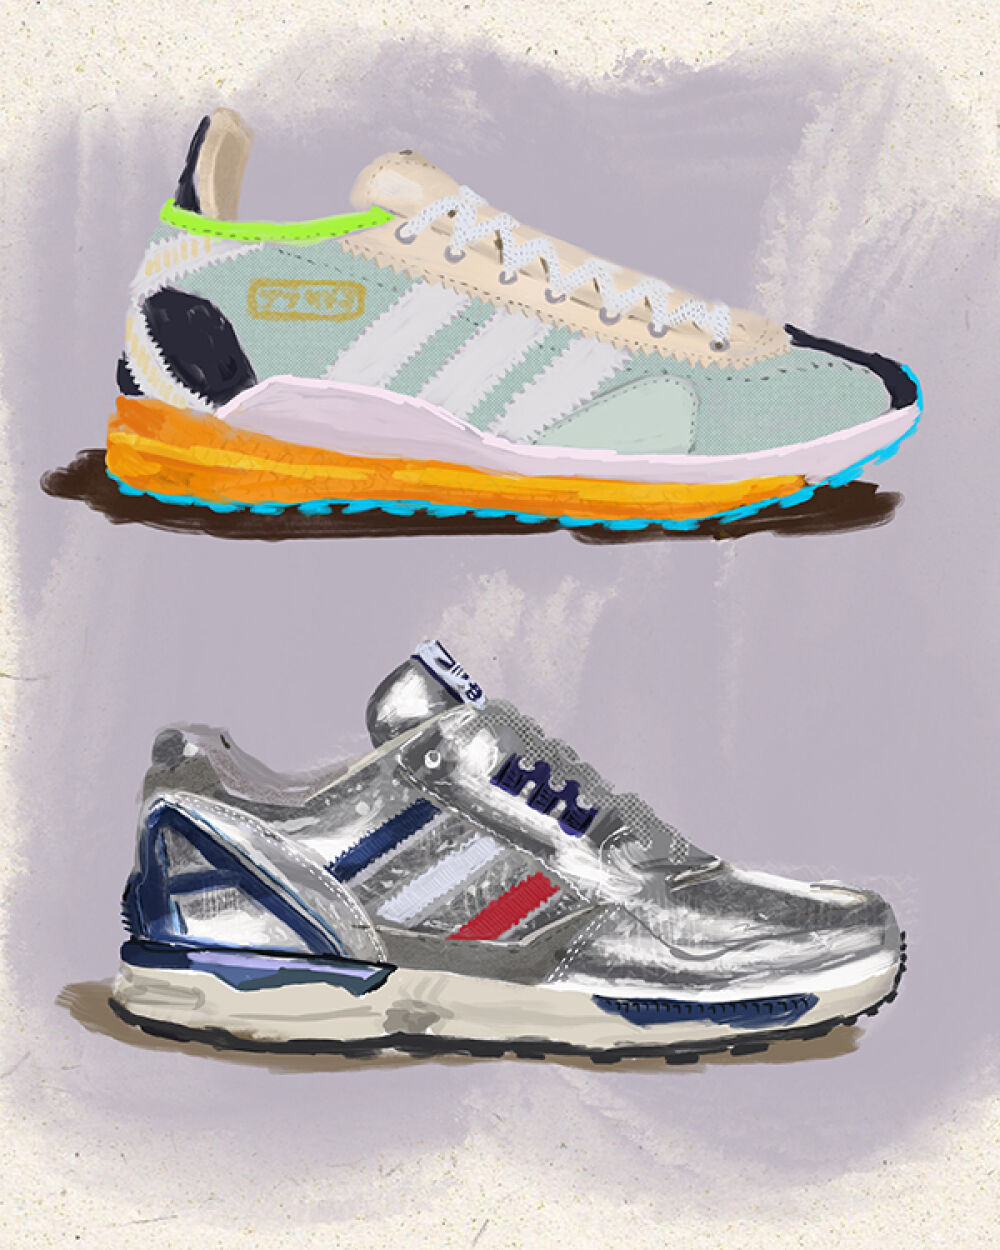 Fashionista Sneakers illustrated by Christina Gliha for Adidas